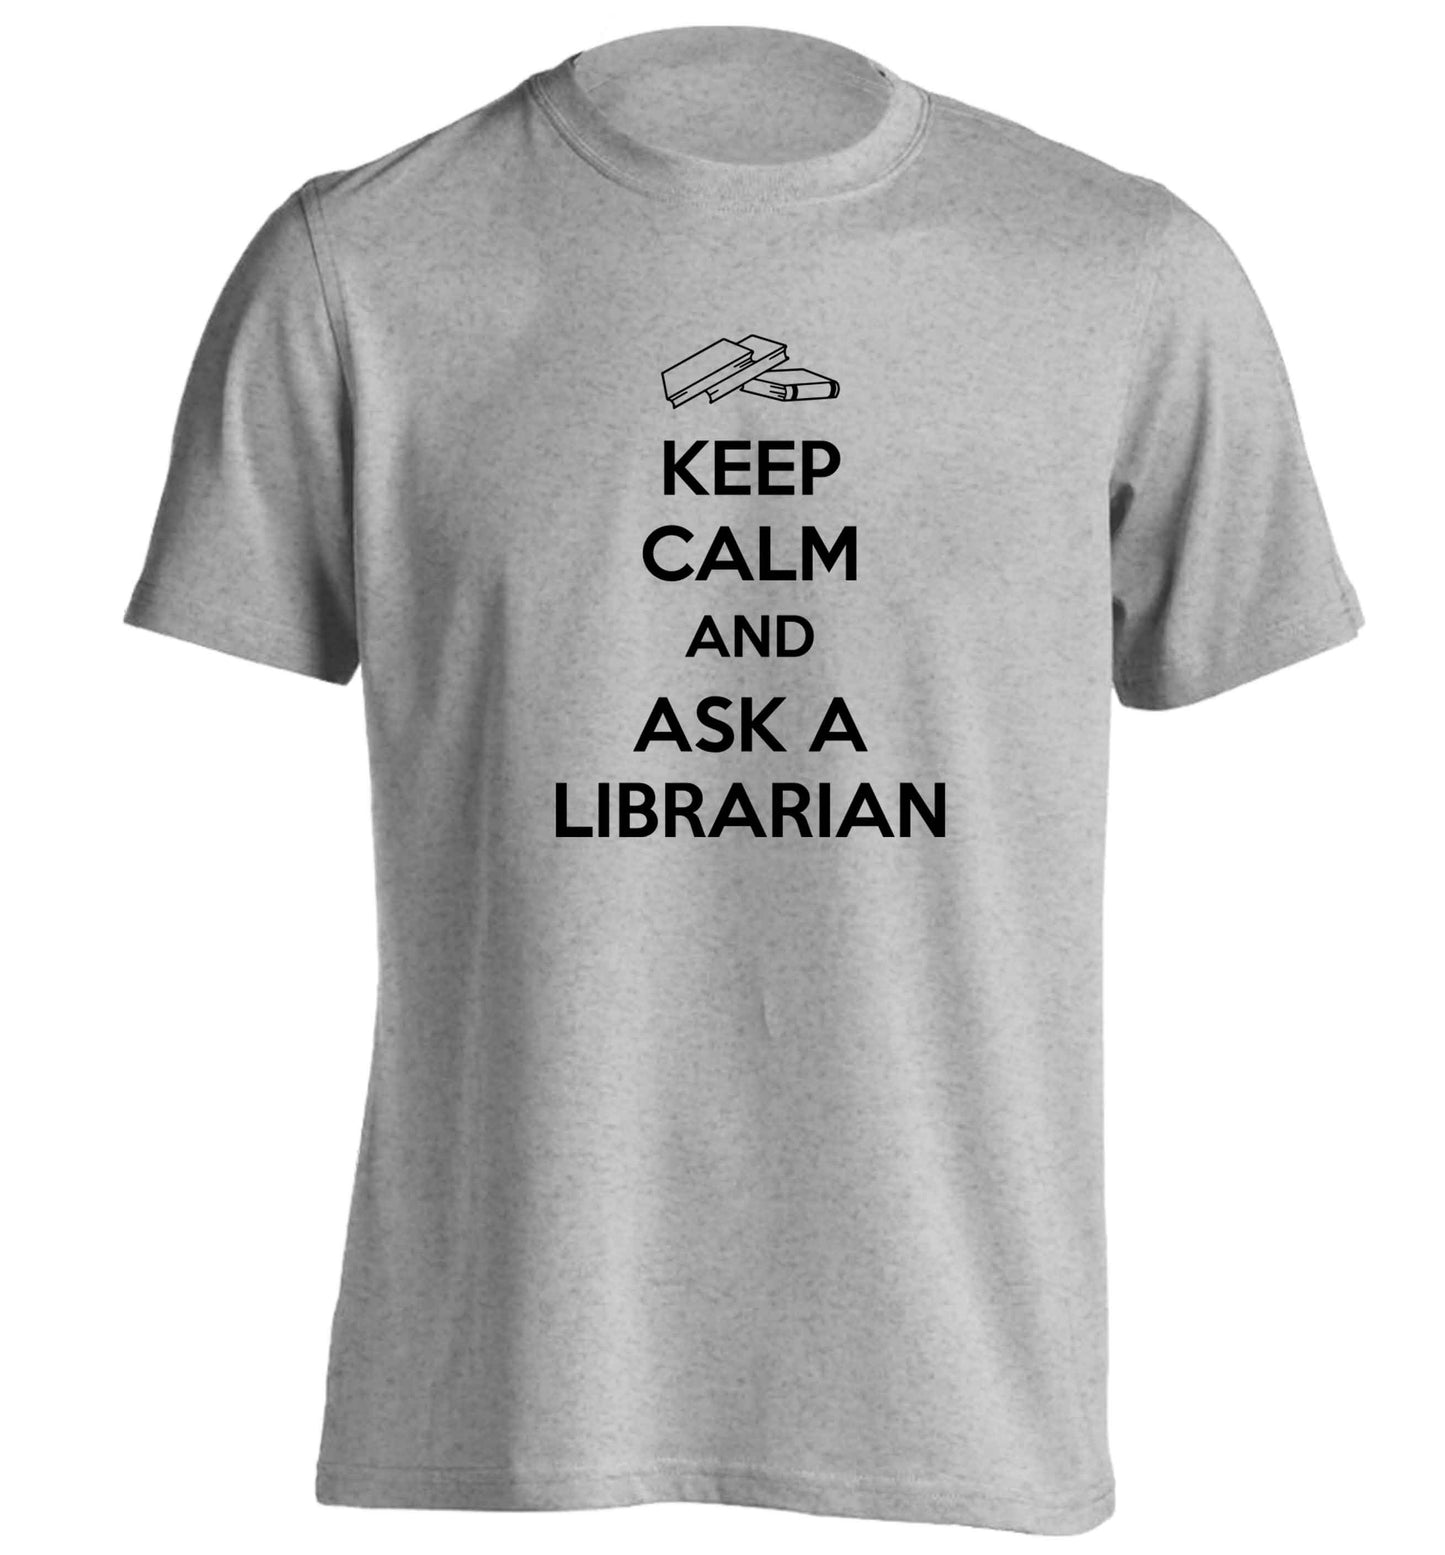 Keep calm and ask a librarian adults unisex grey Tshirt 2XL